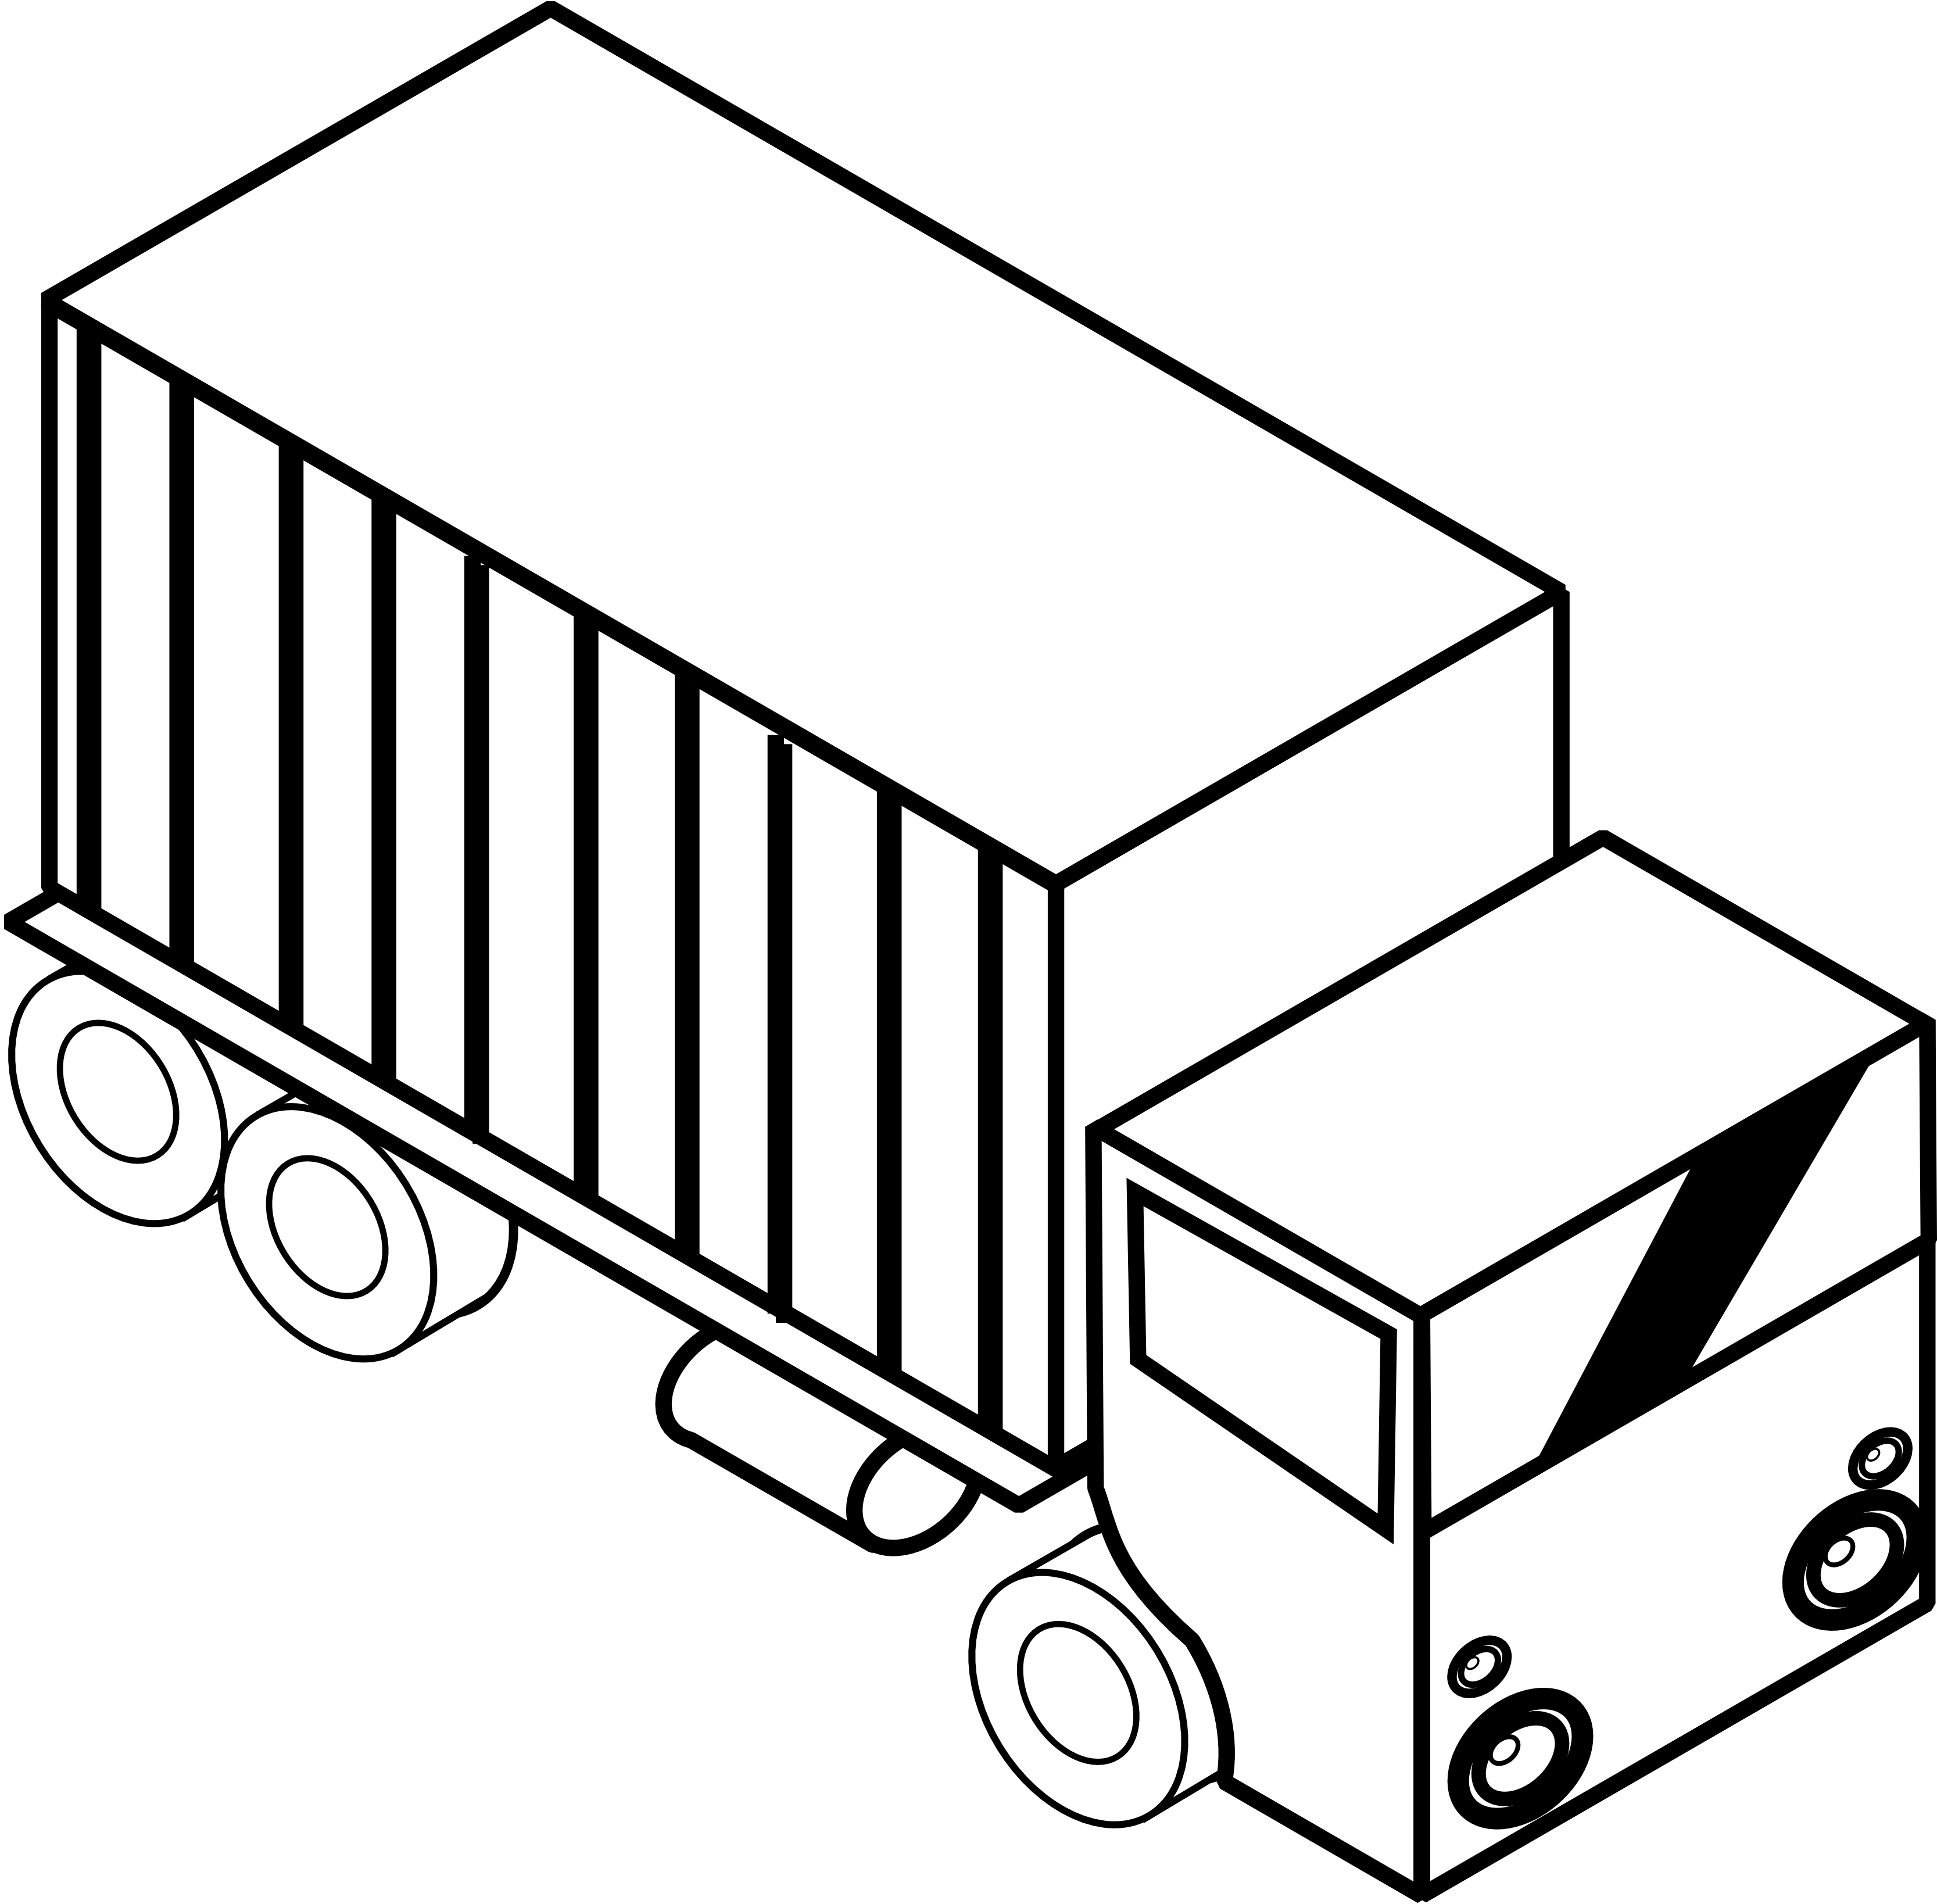 Pickup Truck Clipart Black And White | Clipart Panda - Free ...